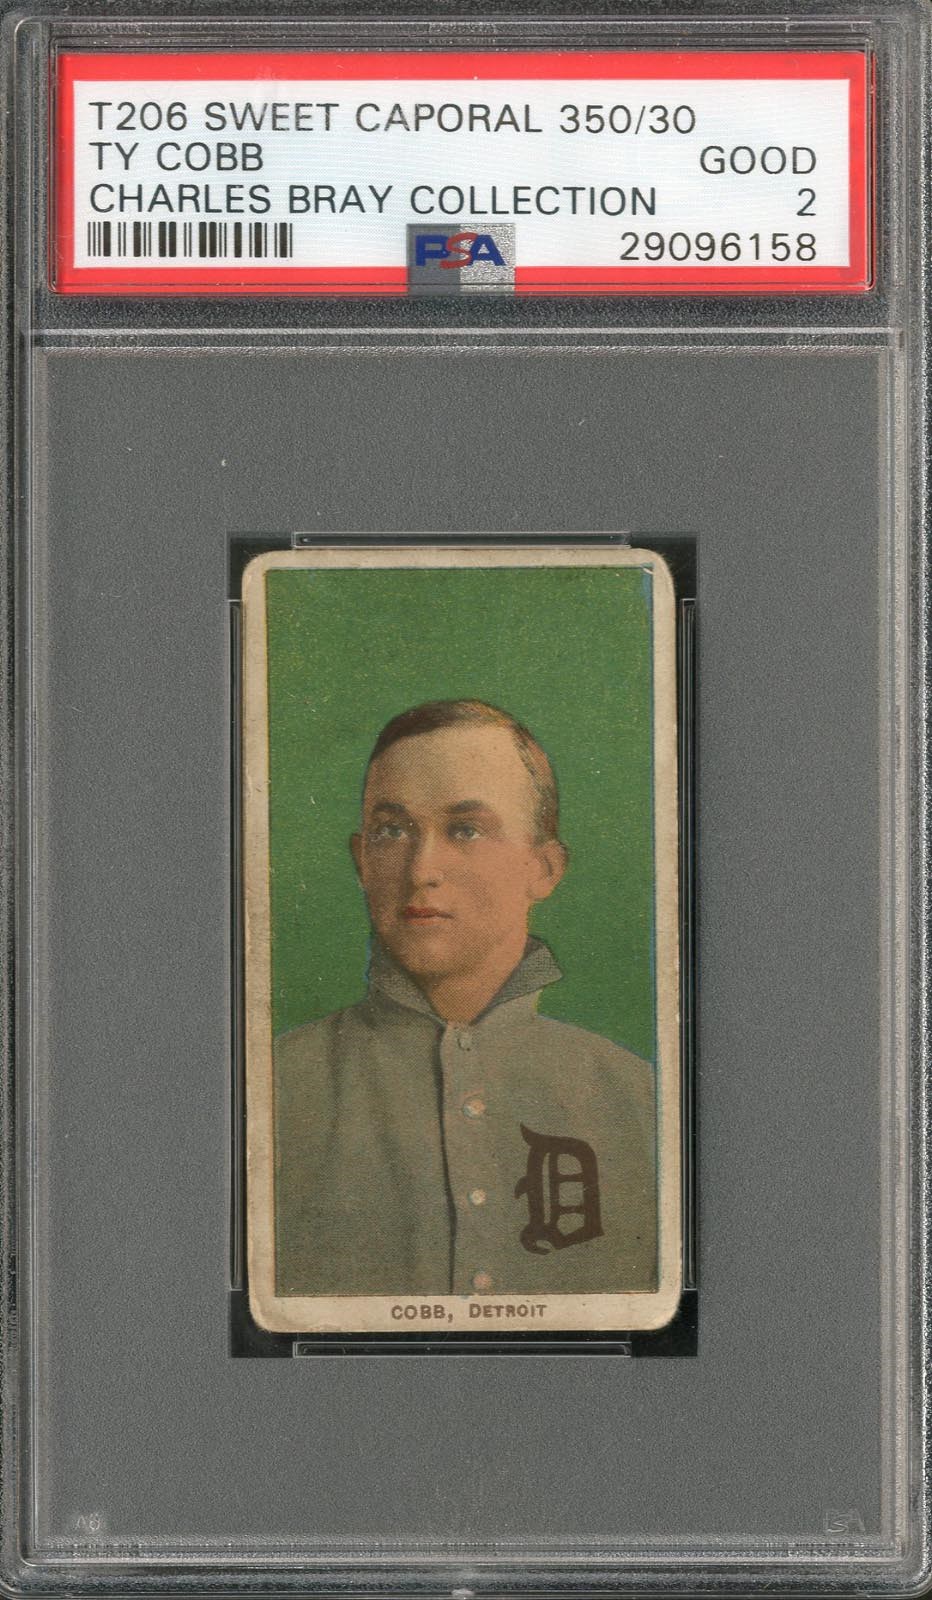 - T206 TY Cobb Sweet Caporal 350/30 Green Portrait PSA 2 From The Charles Bray Collection